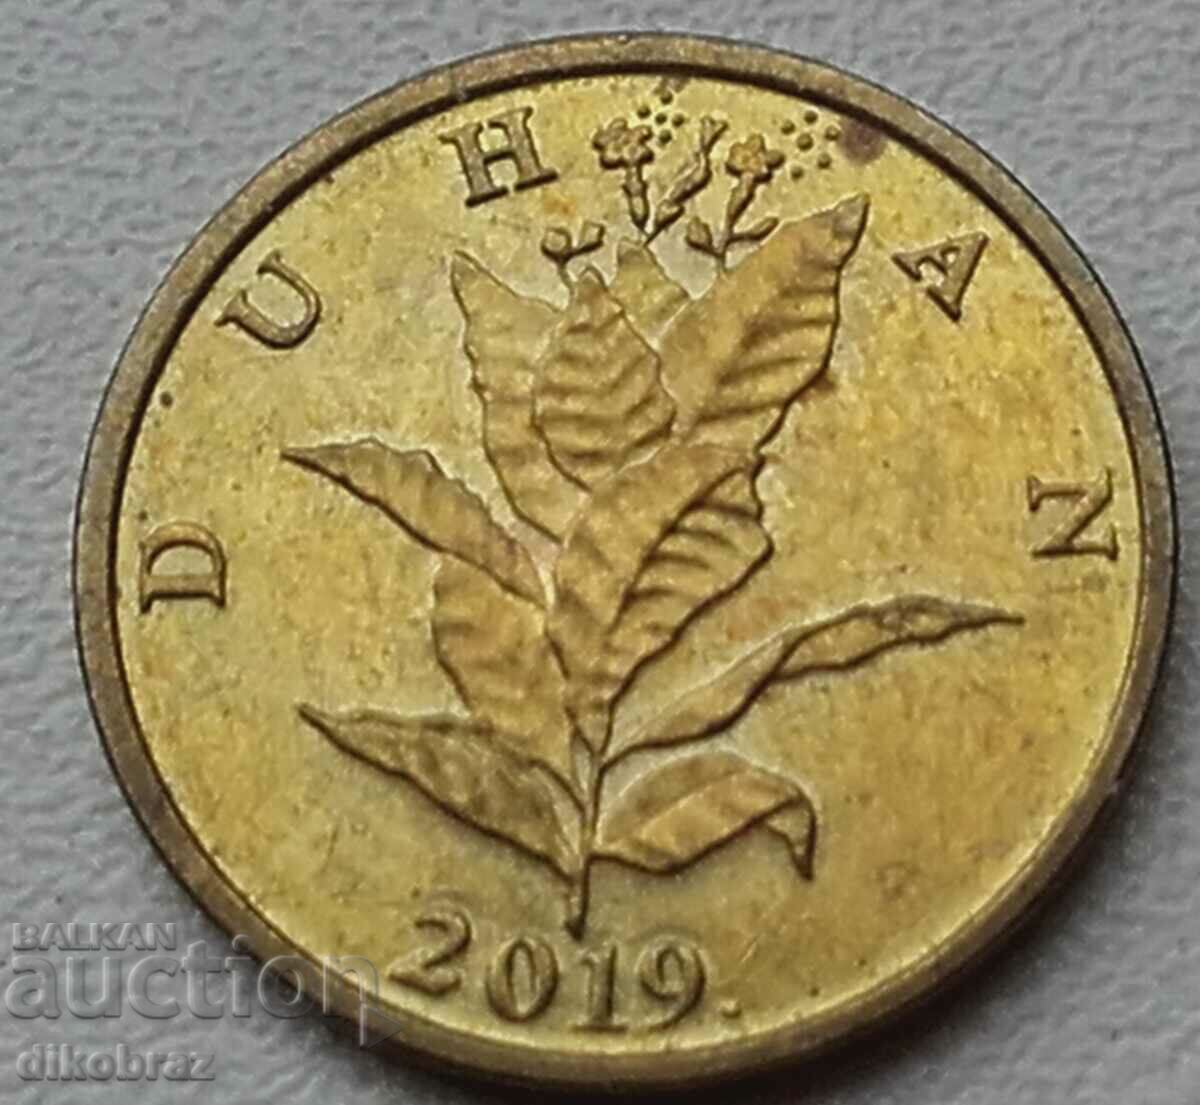 Croatia - 2019 - 10 lindens - from a penny